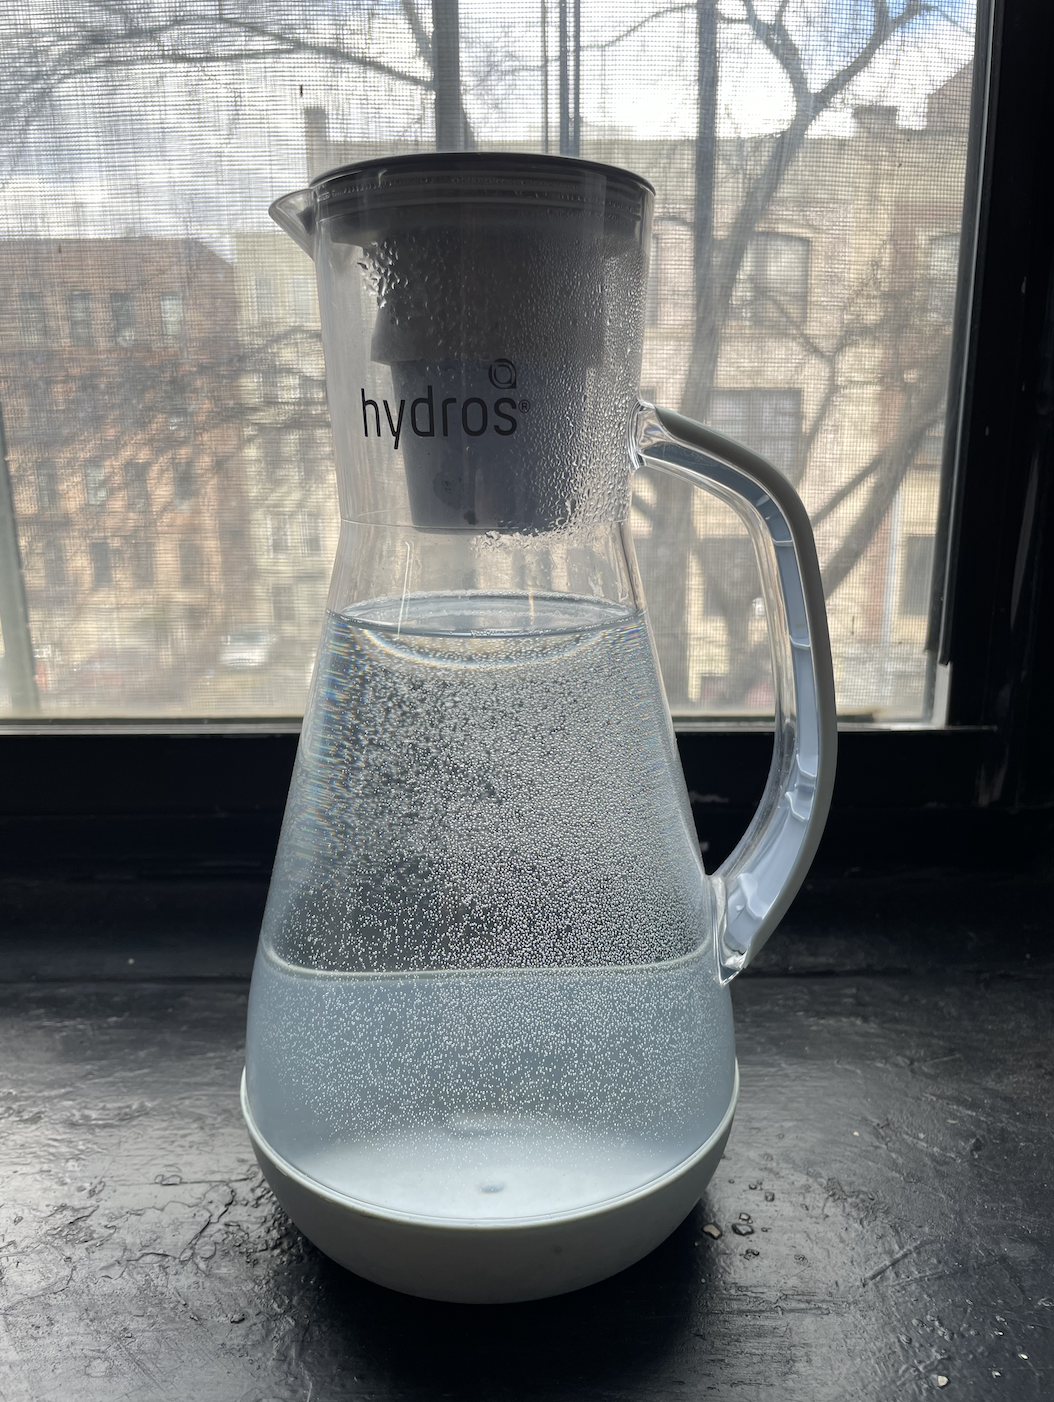 image of the hydros pitcher on a windowsill